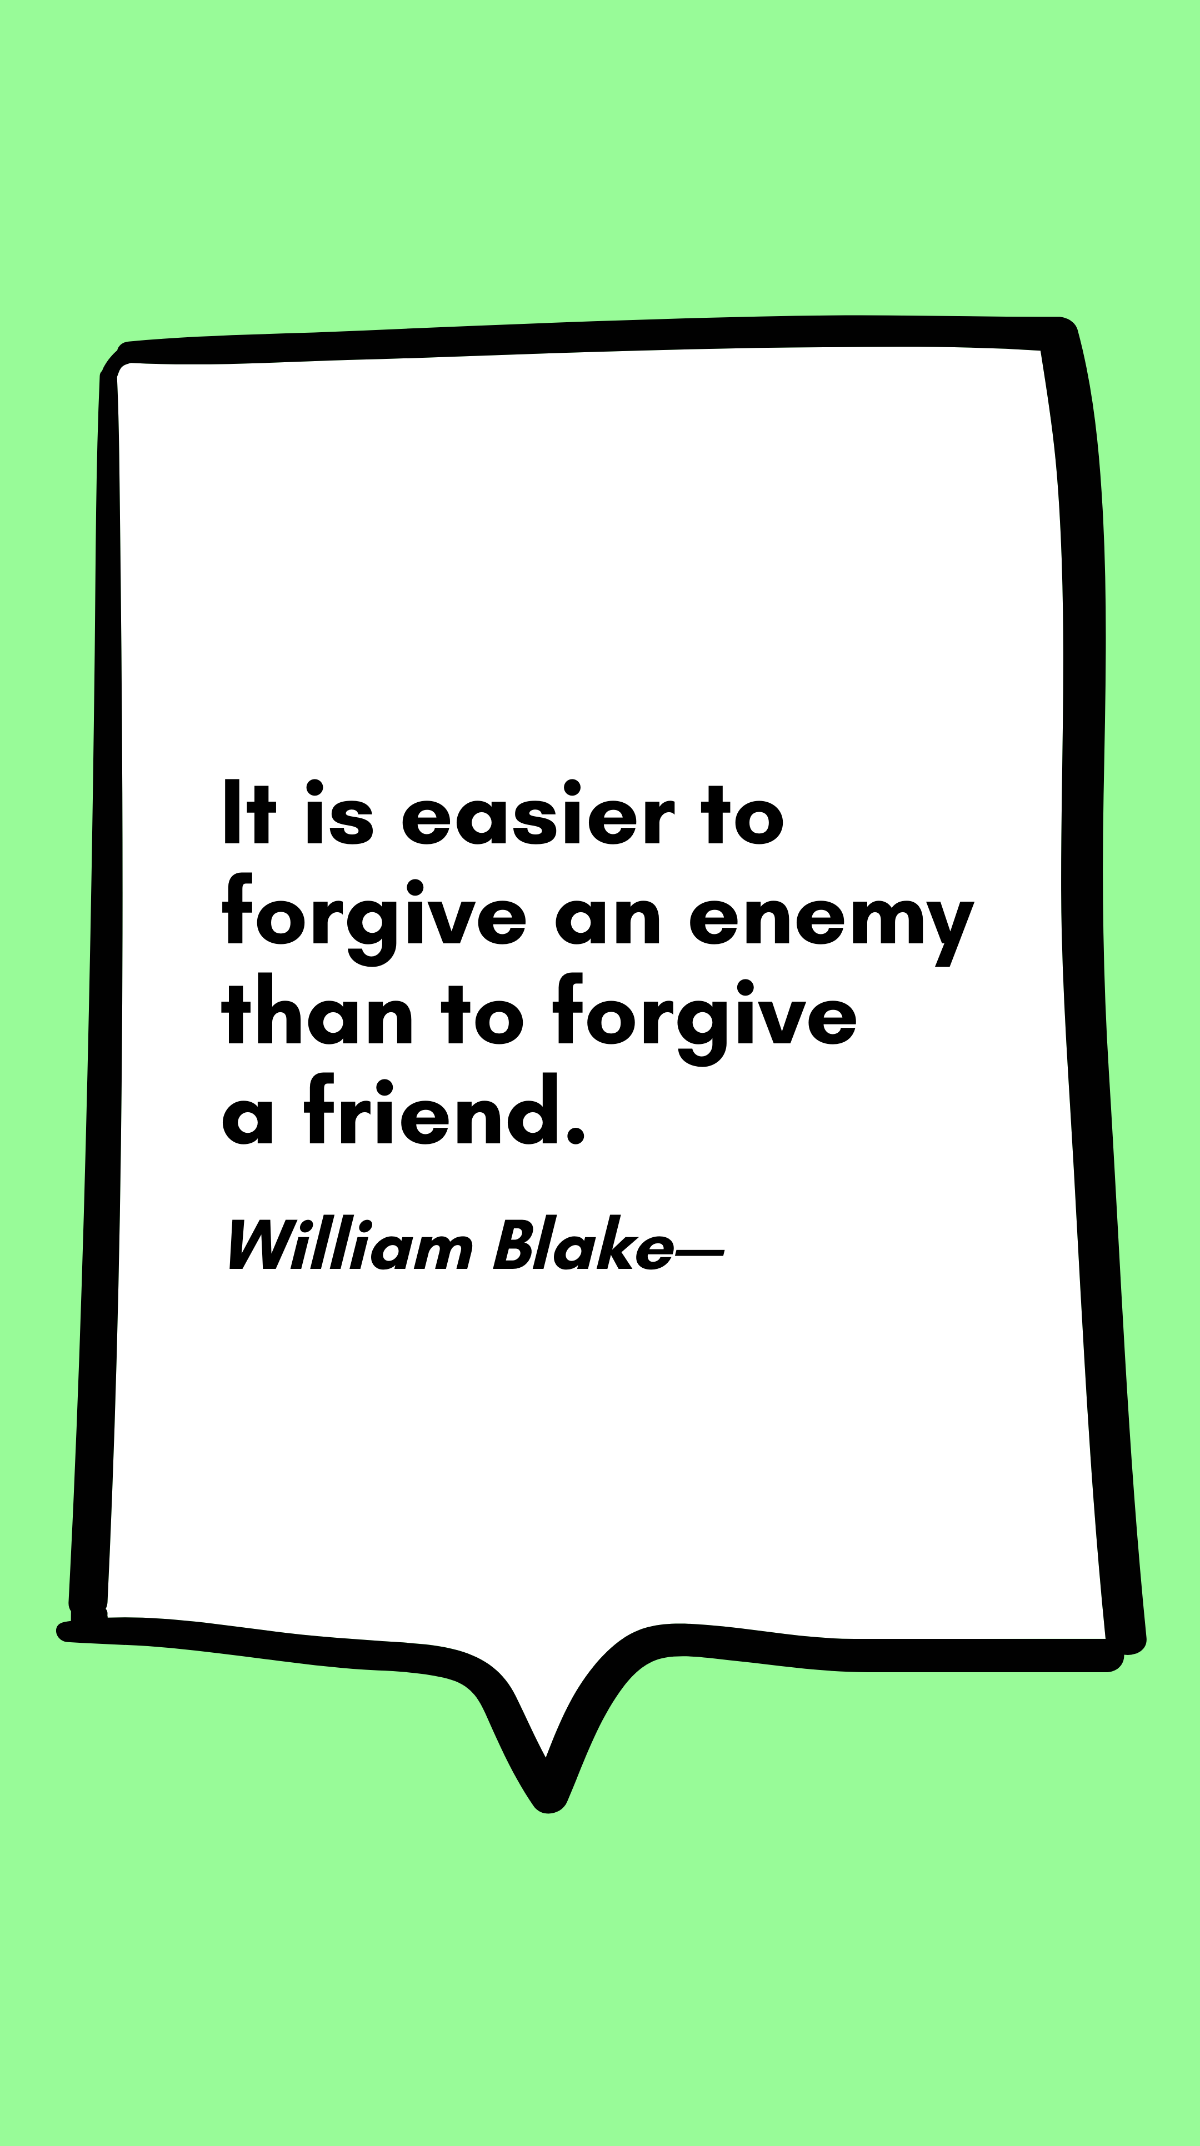 William Blake - It is easier to forgive an enemy than to forgive a friend.